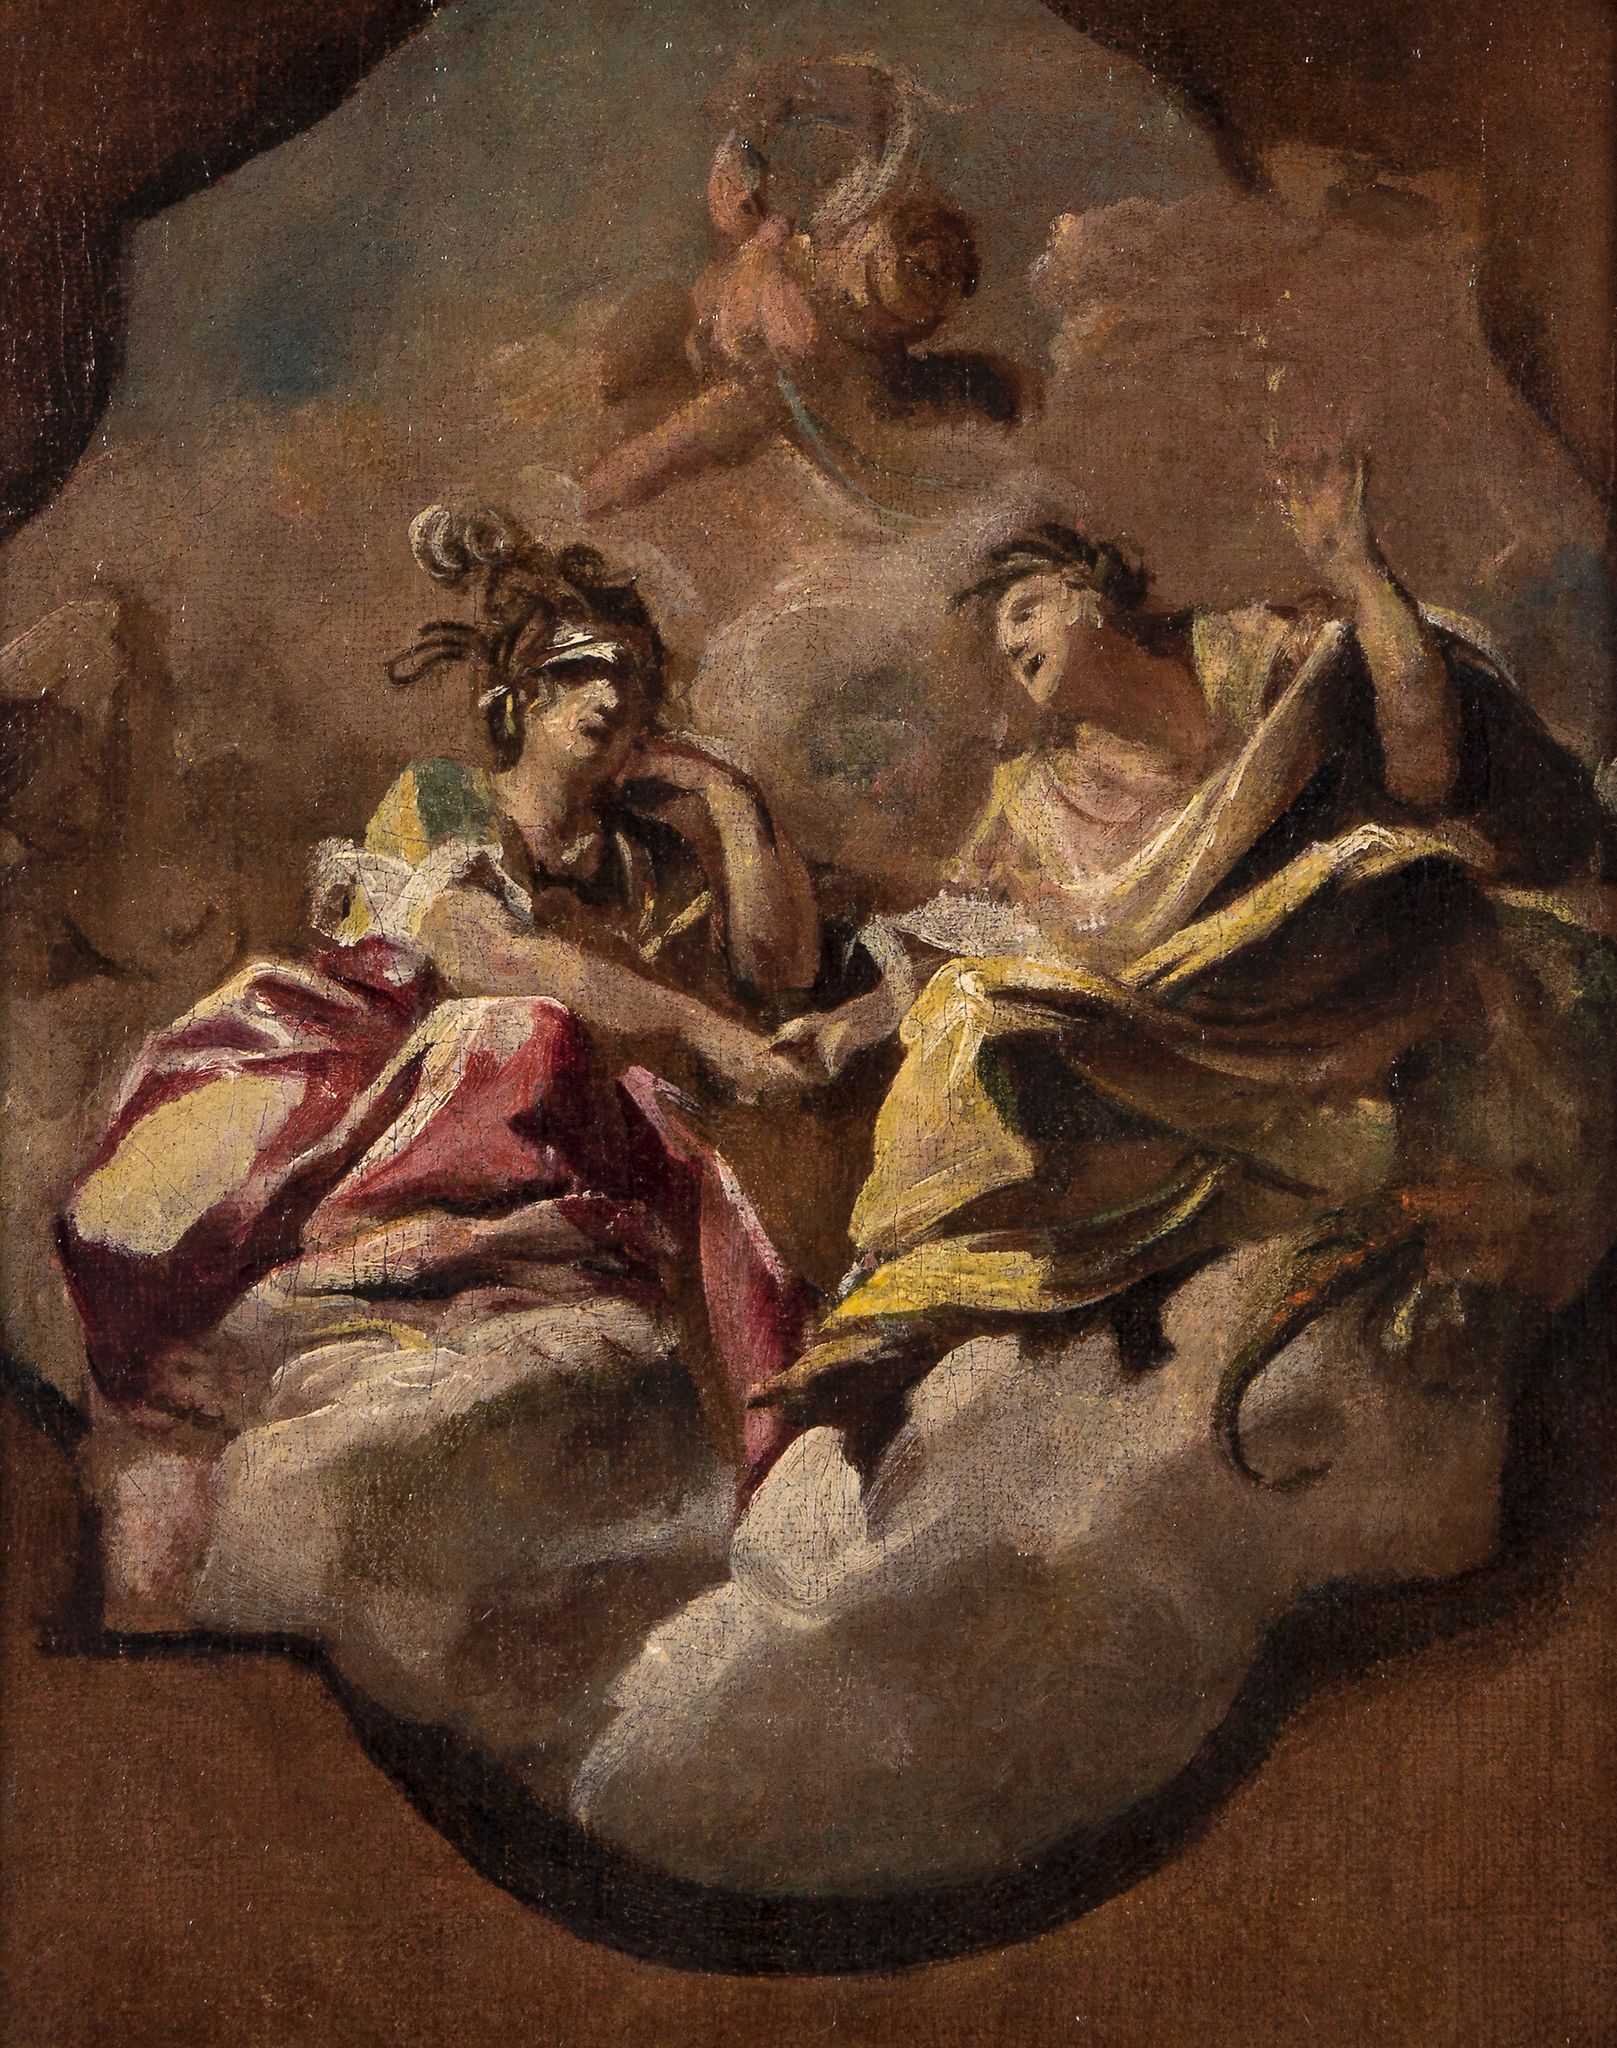 Attributed to Carlo Innocenzo Carlone (1686-1775) - An allegorical scene: A modello for a ceiling